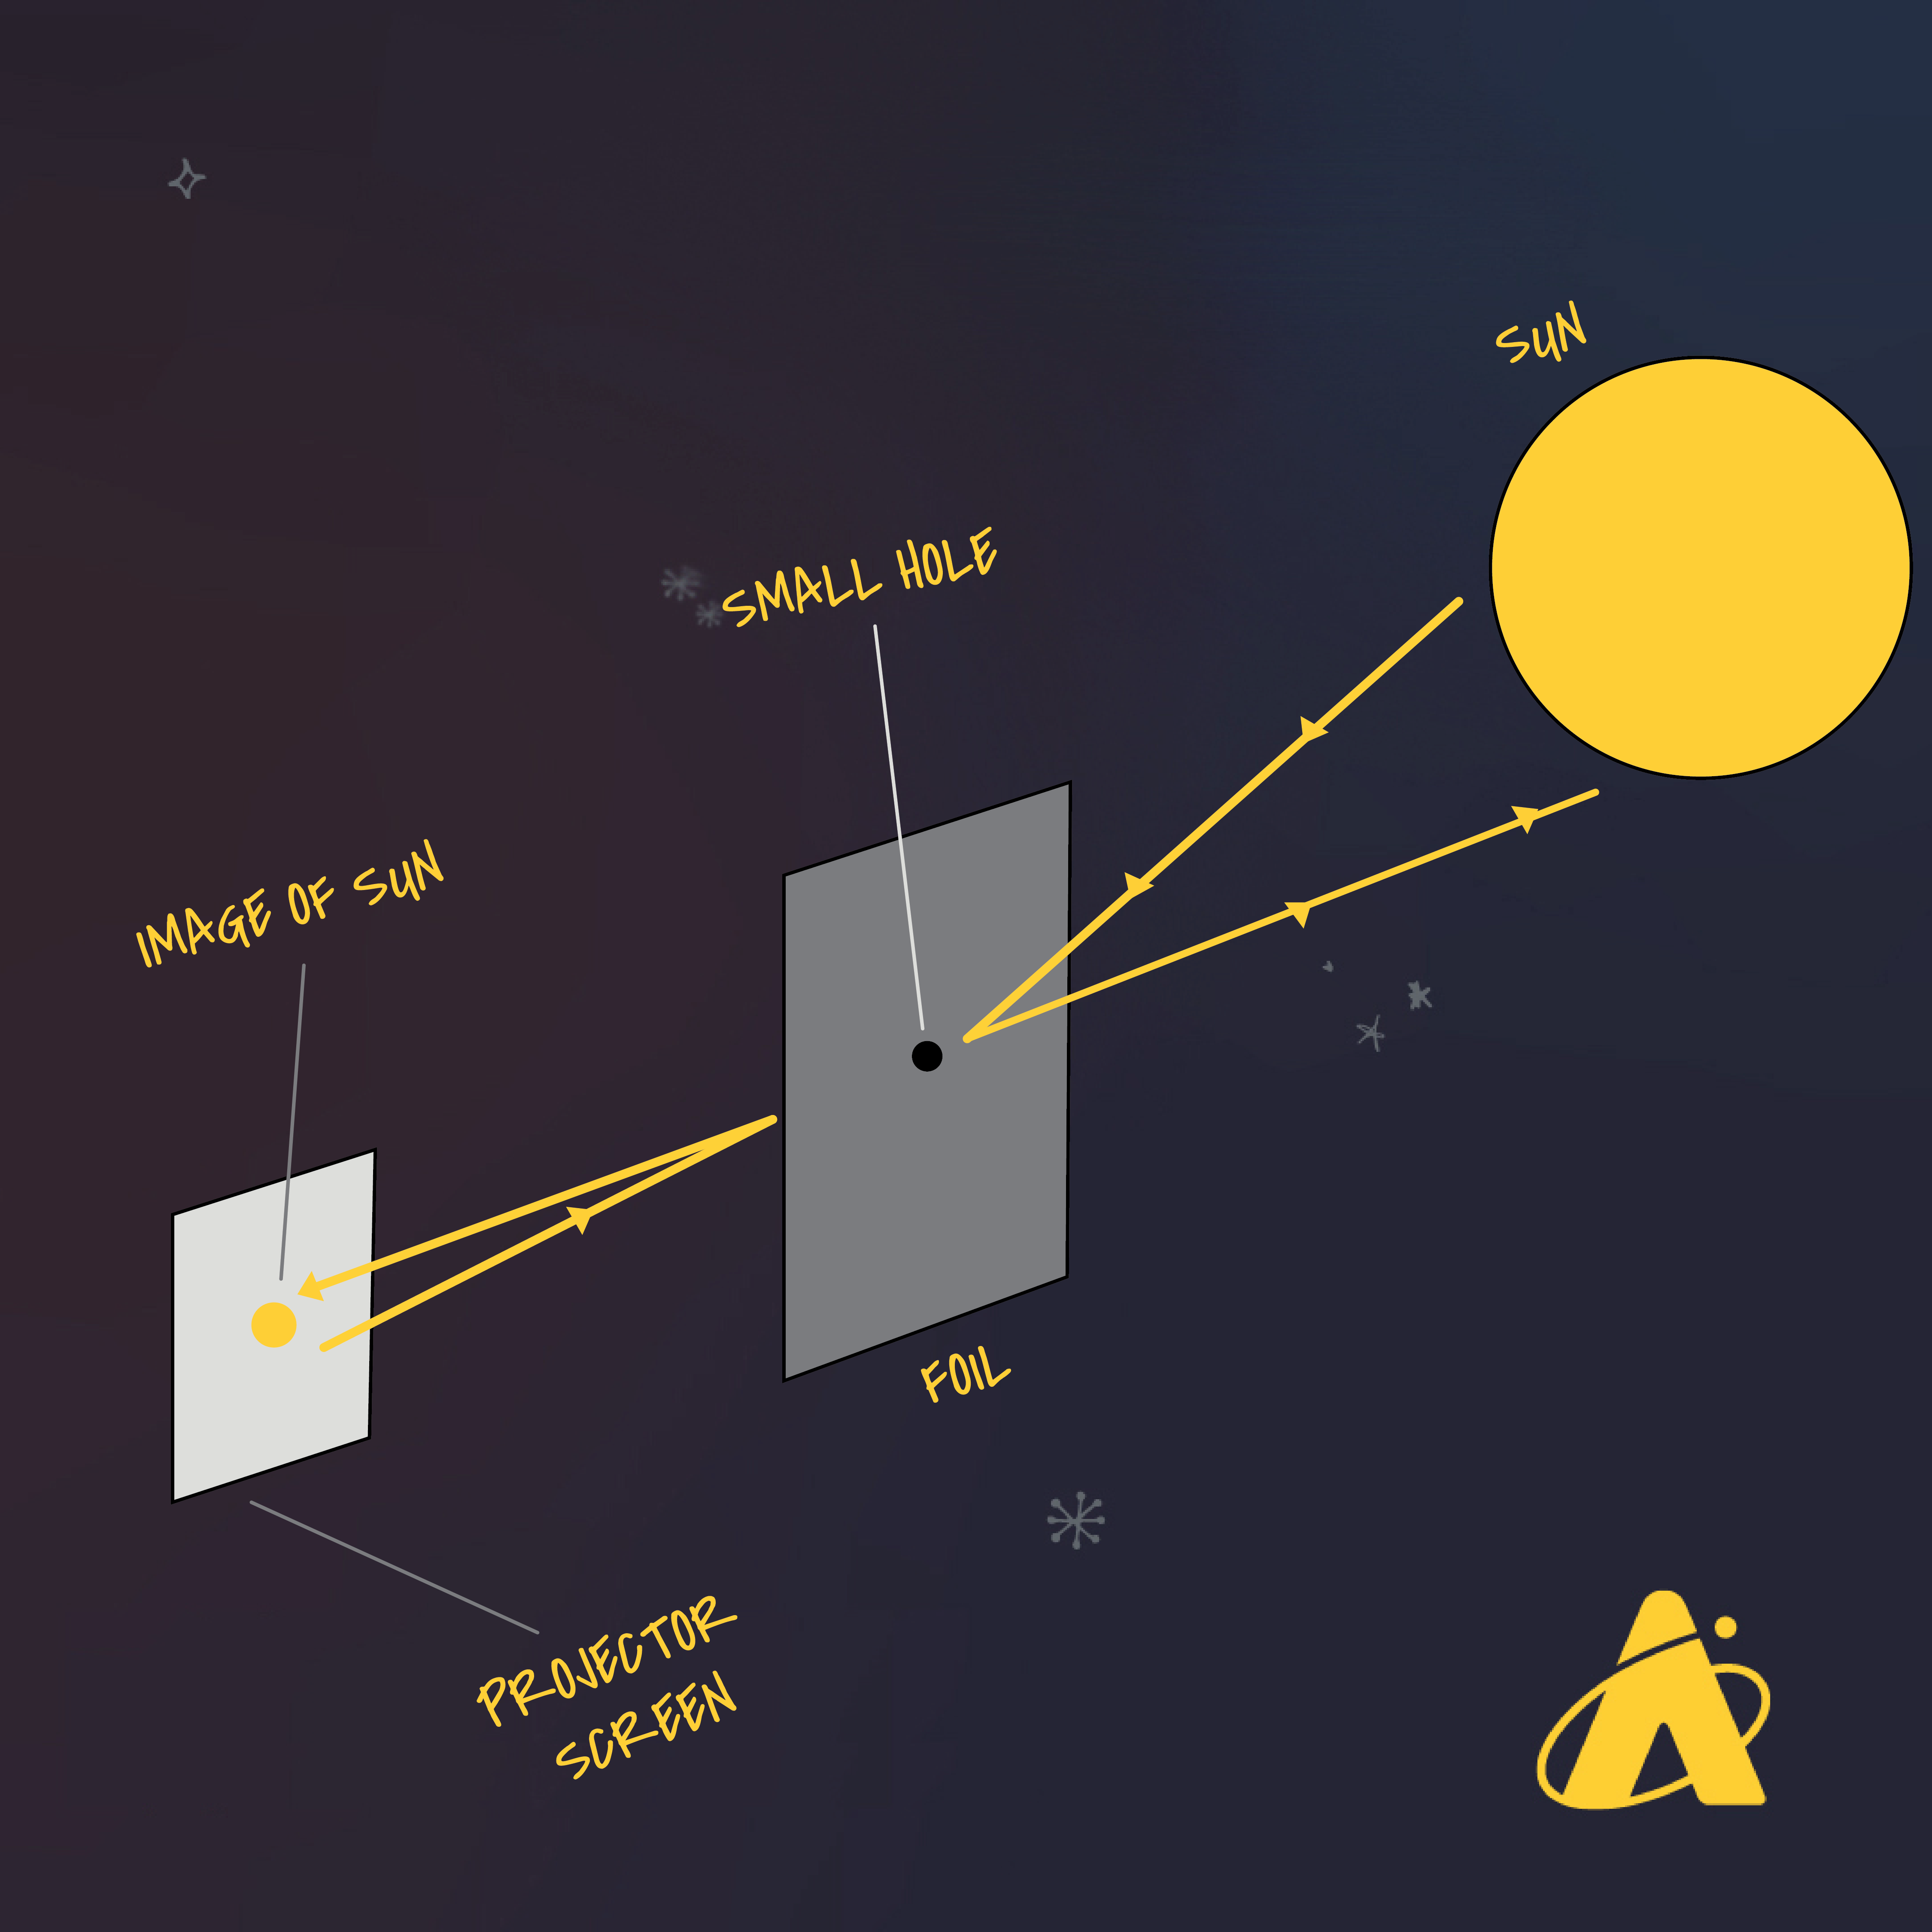 Adler Planetarium infographic depicting how a pinhole projector works. Light from the Sun travels through the small hole in the foil and reflects the image of the Sun on the screen, creating a safe way to look at the Sun, especially during a solar eclipse.